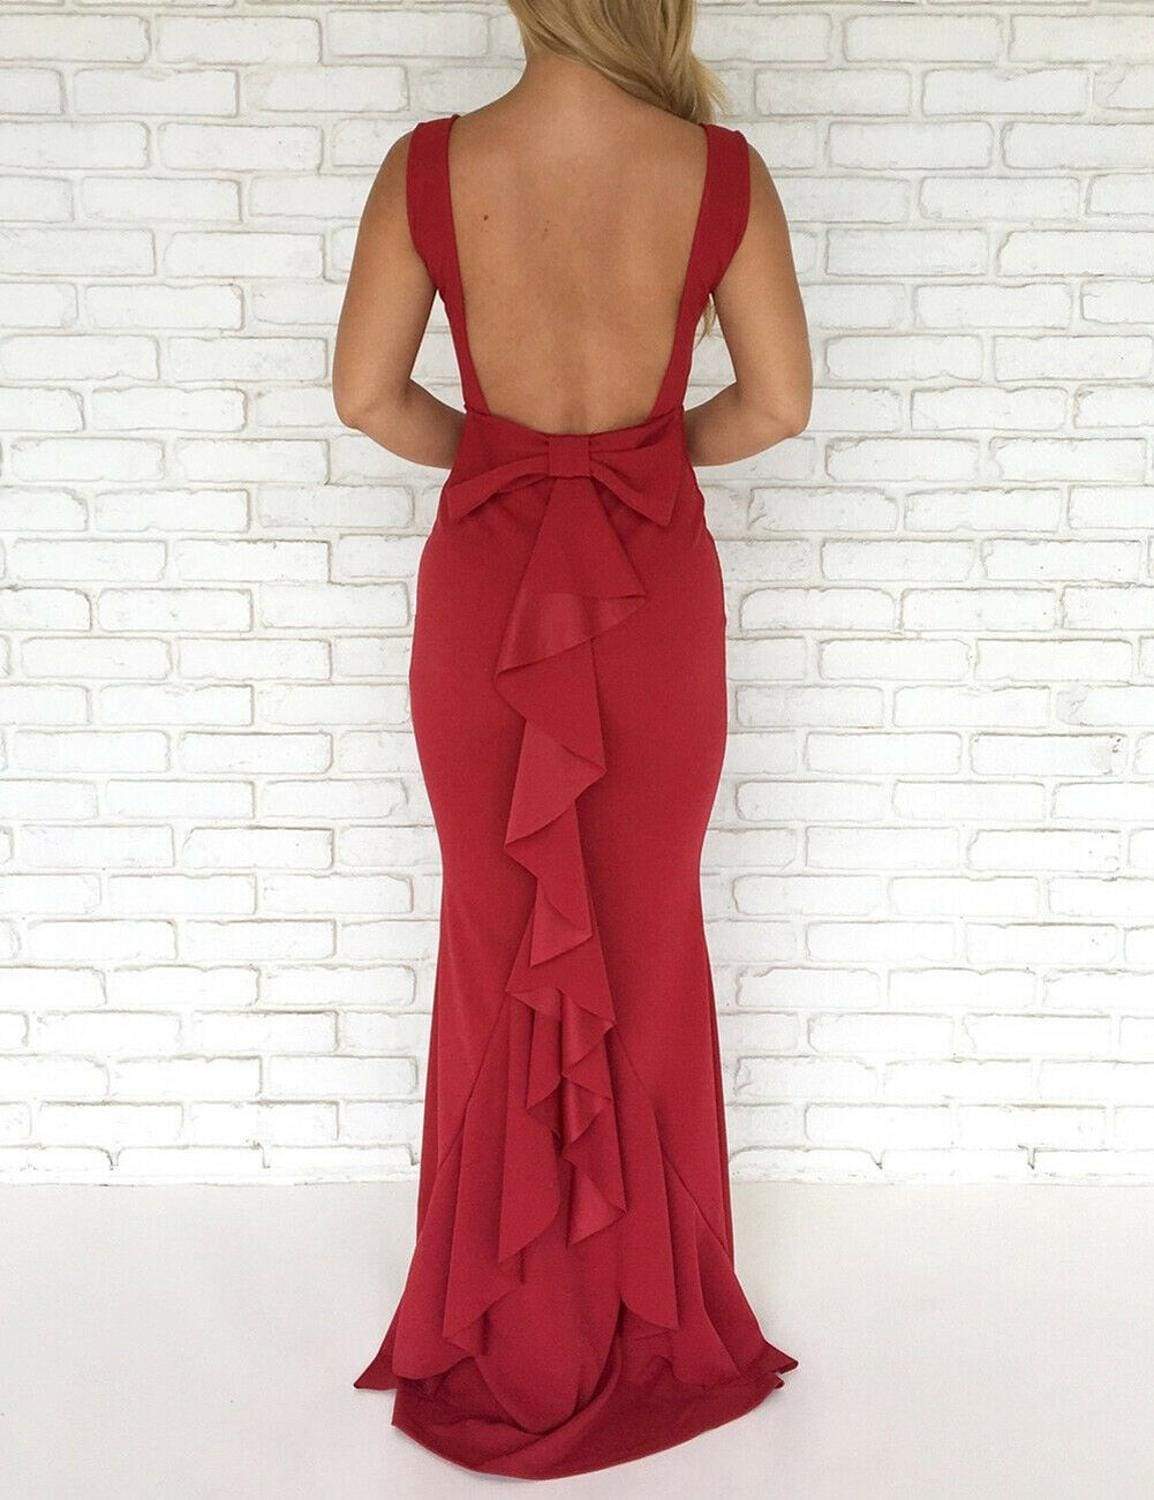 Women Ladies Formal Backless Long Dress Party Ball Prom Gown Wedding Bridesmaid Sleeveless O-Neck Long Maxi Dress